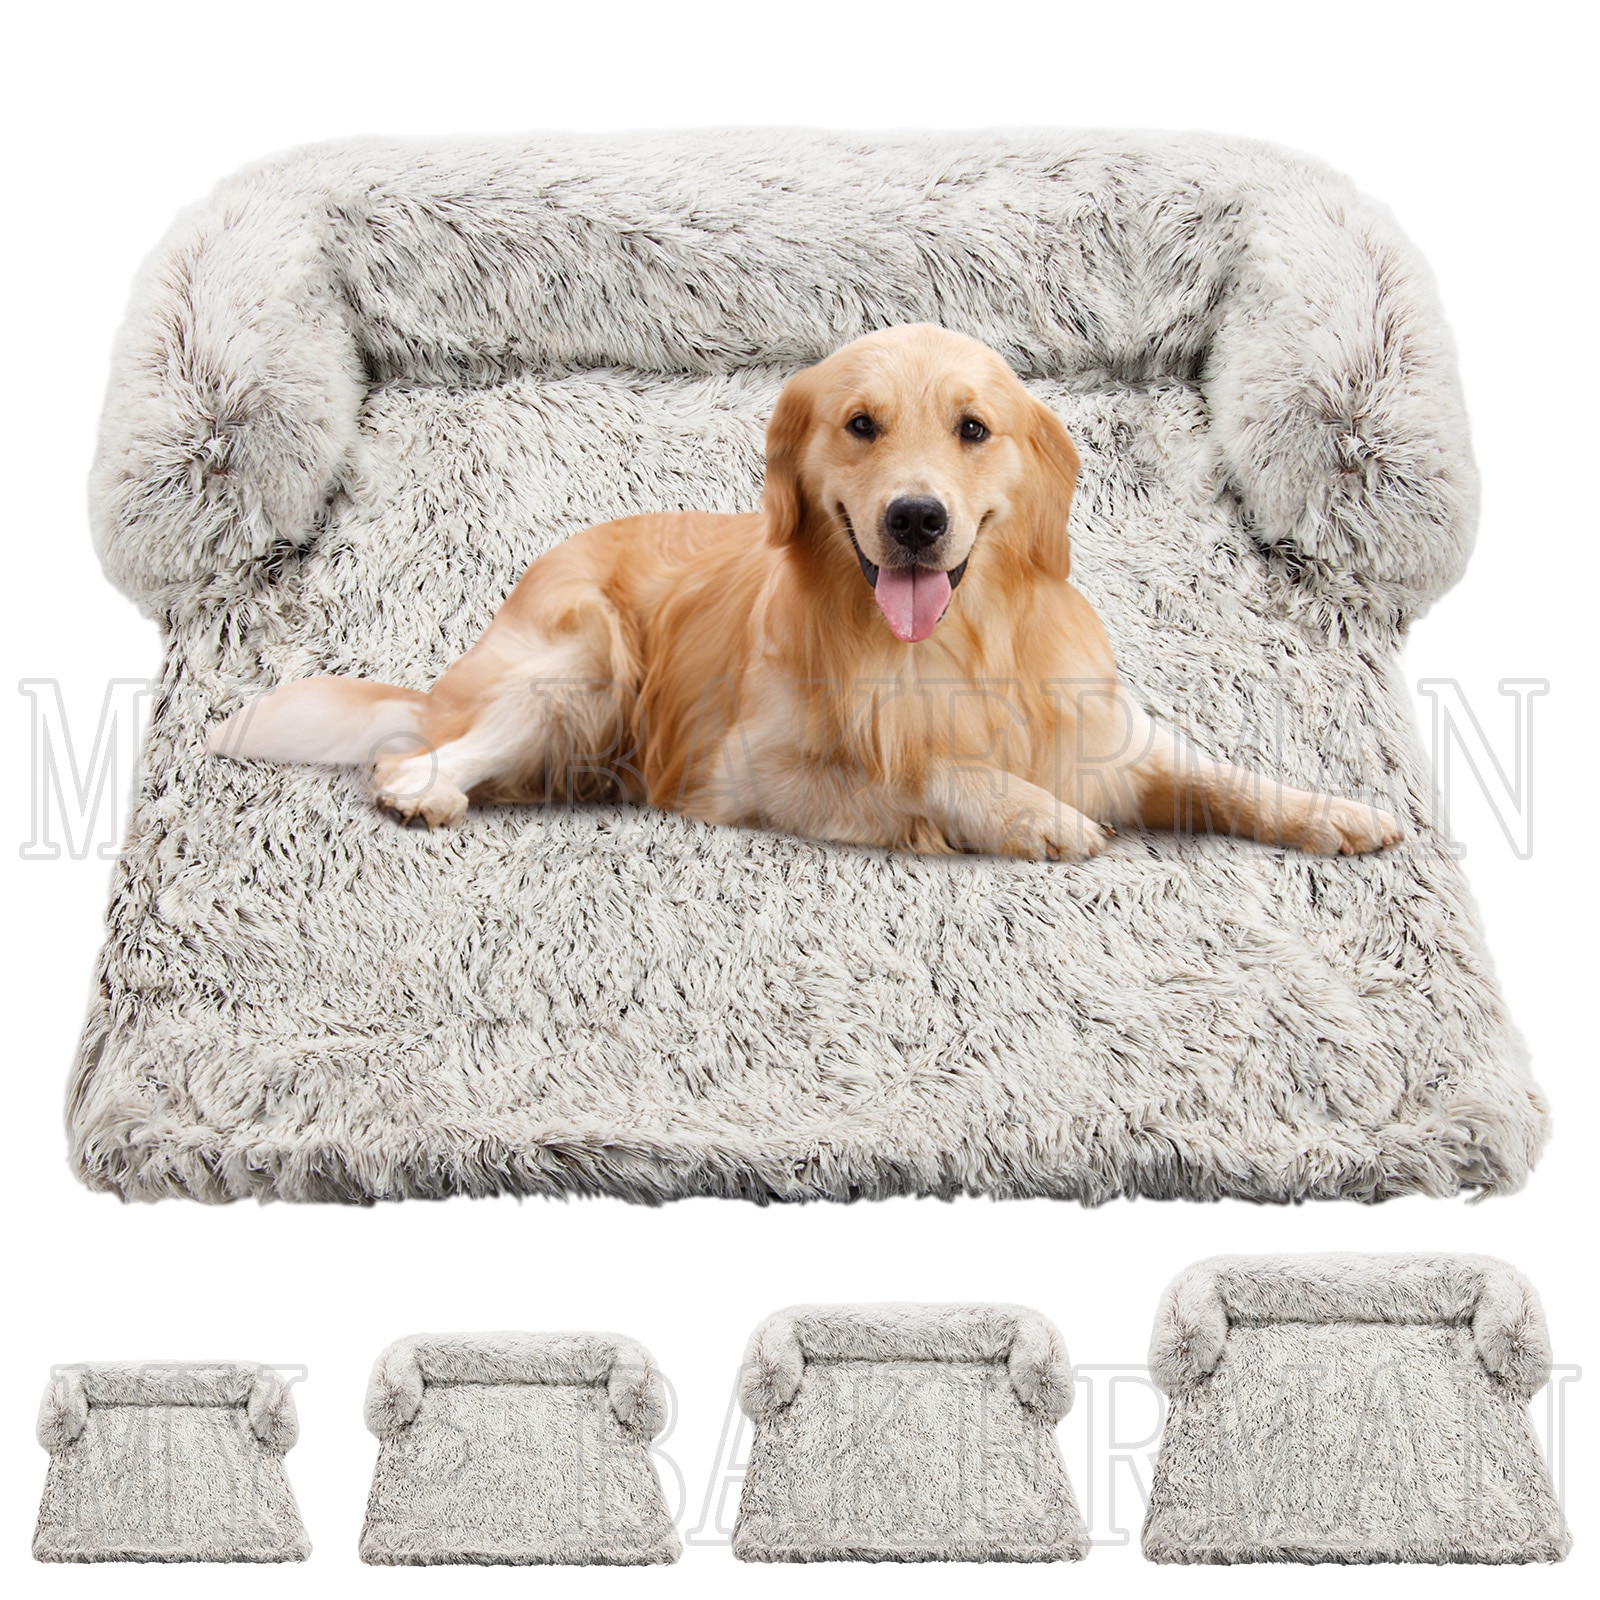 1160162594 1 - Large Plush Dog Sofa Bed Couch Protector - thepamperedpooch-co, pet-beds, dog-beds